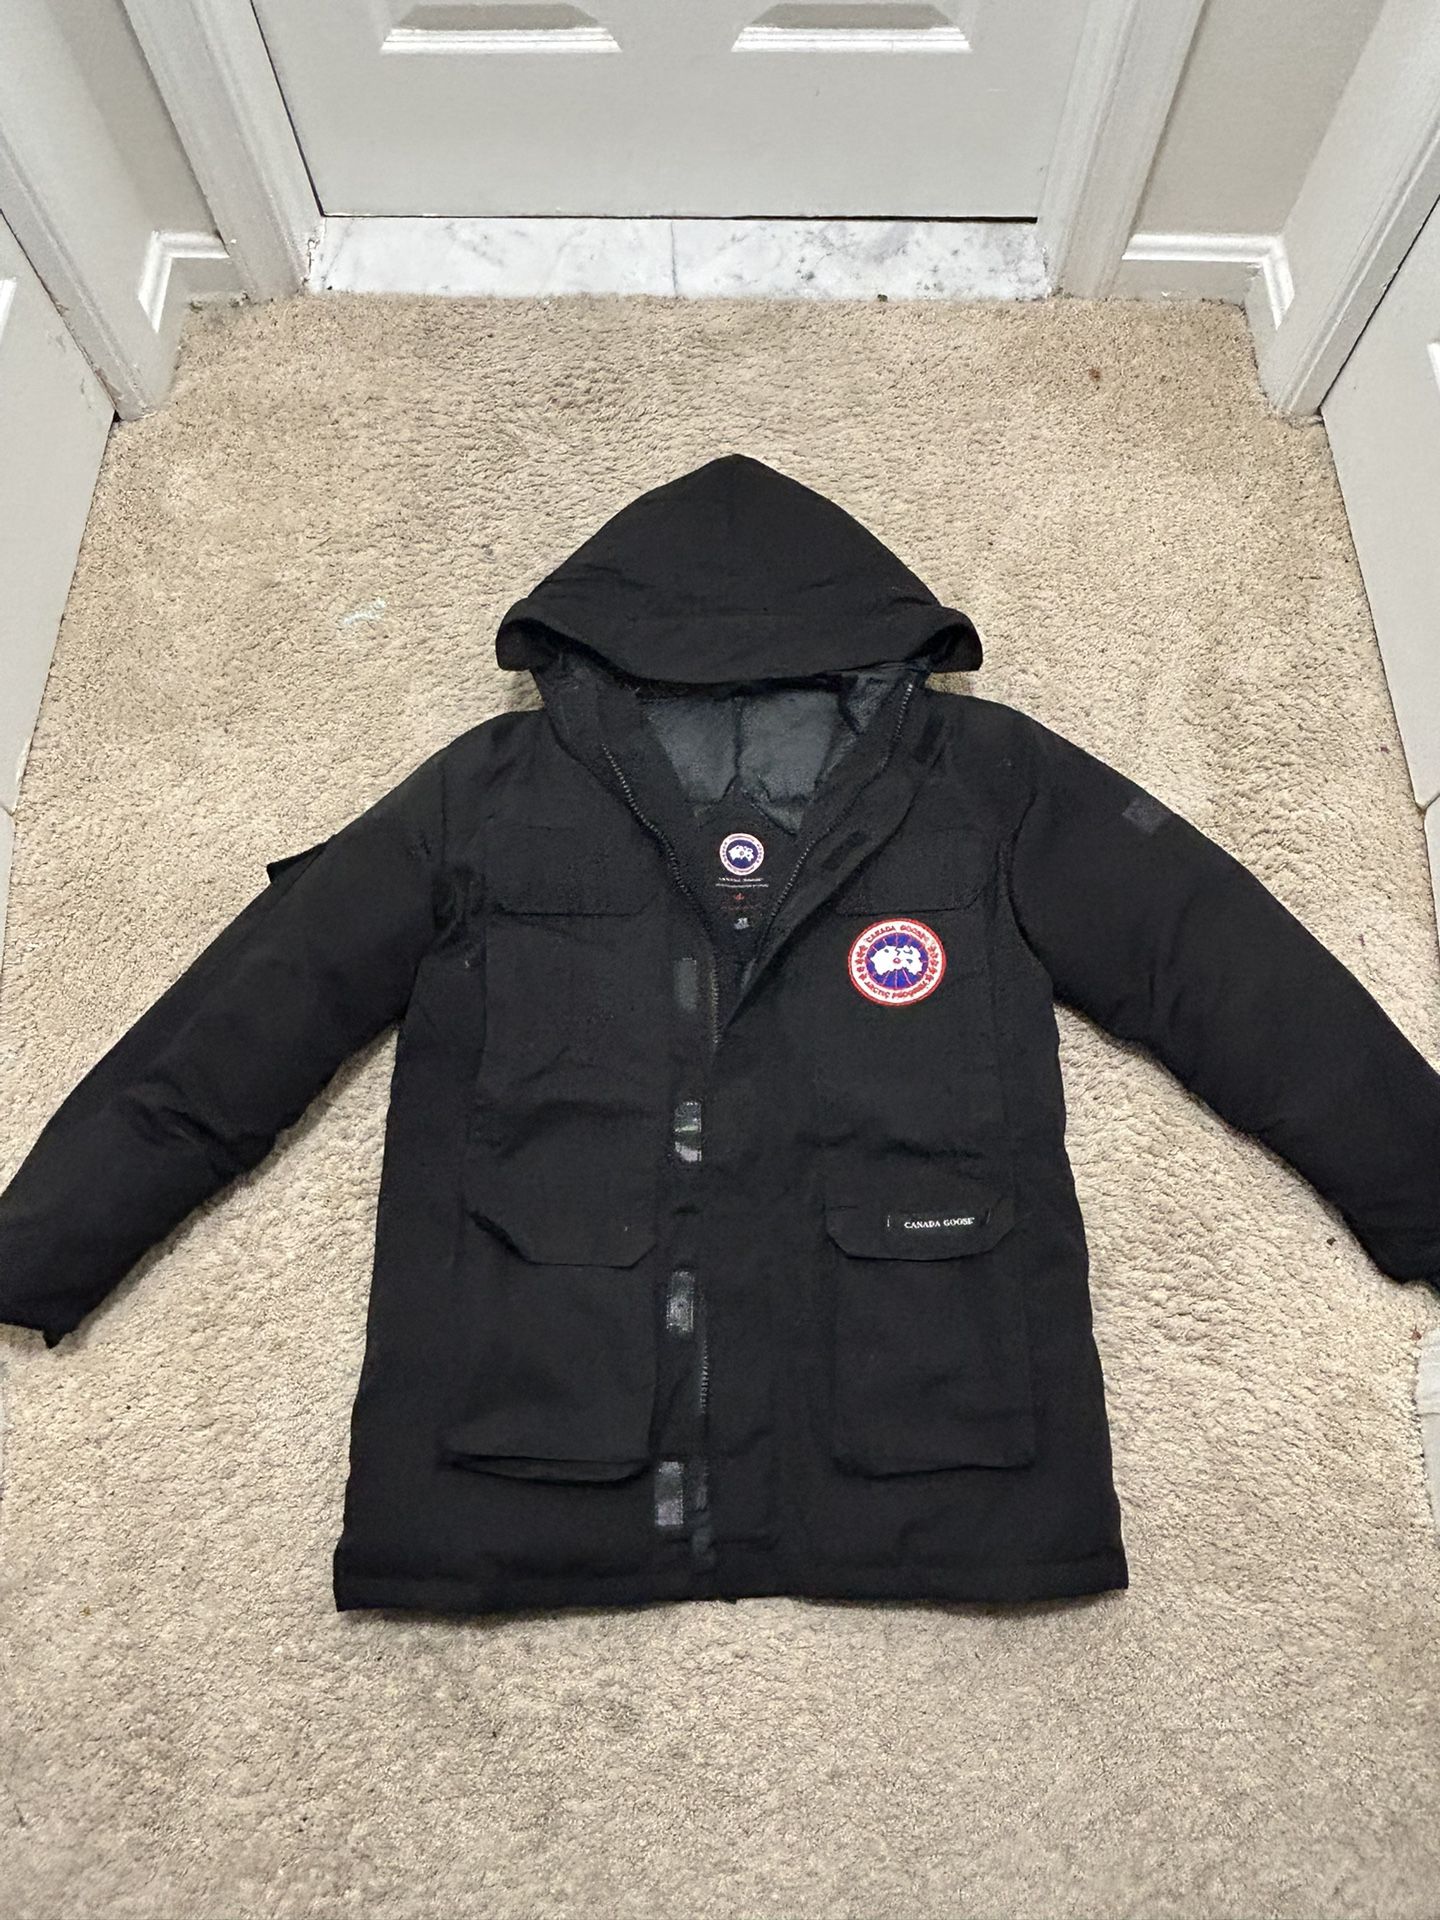 *Best Offer* Canada Goose Expedition Heritage Fusion Parka 